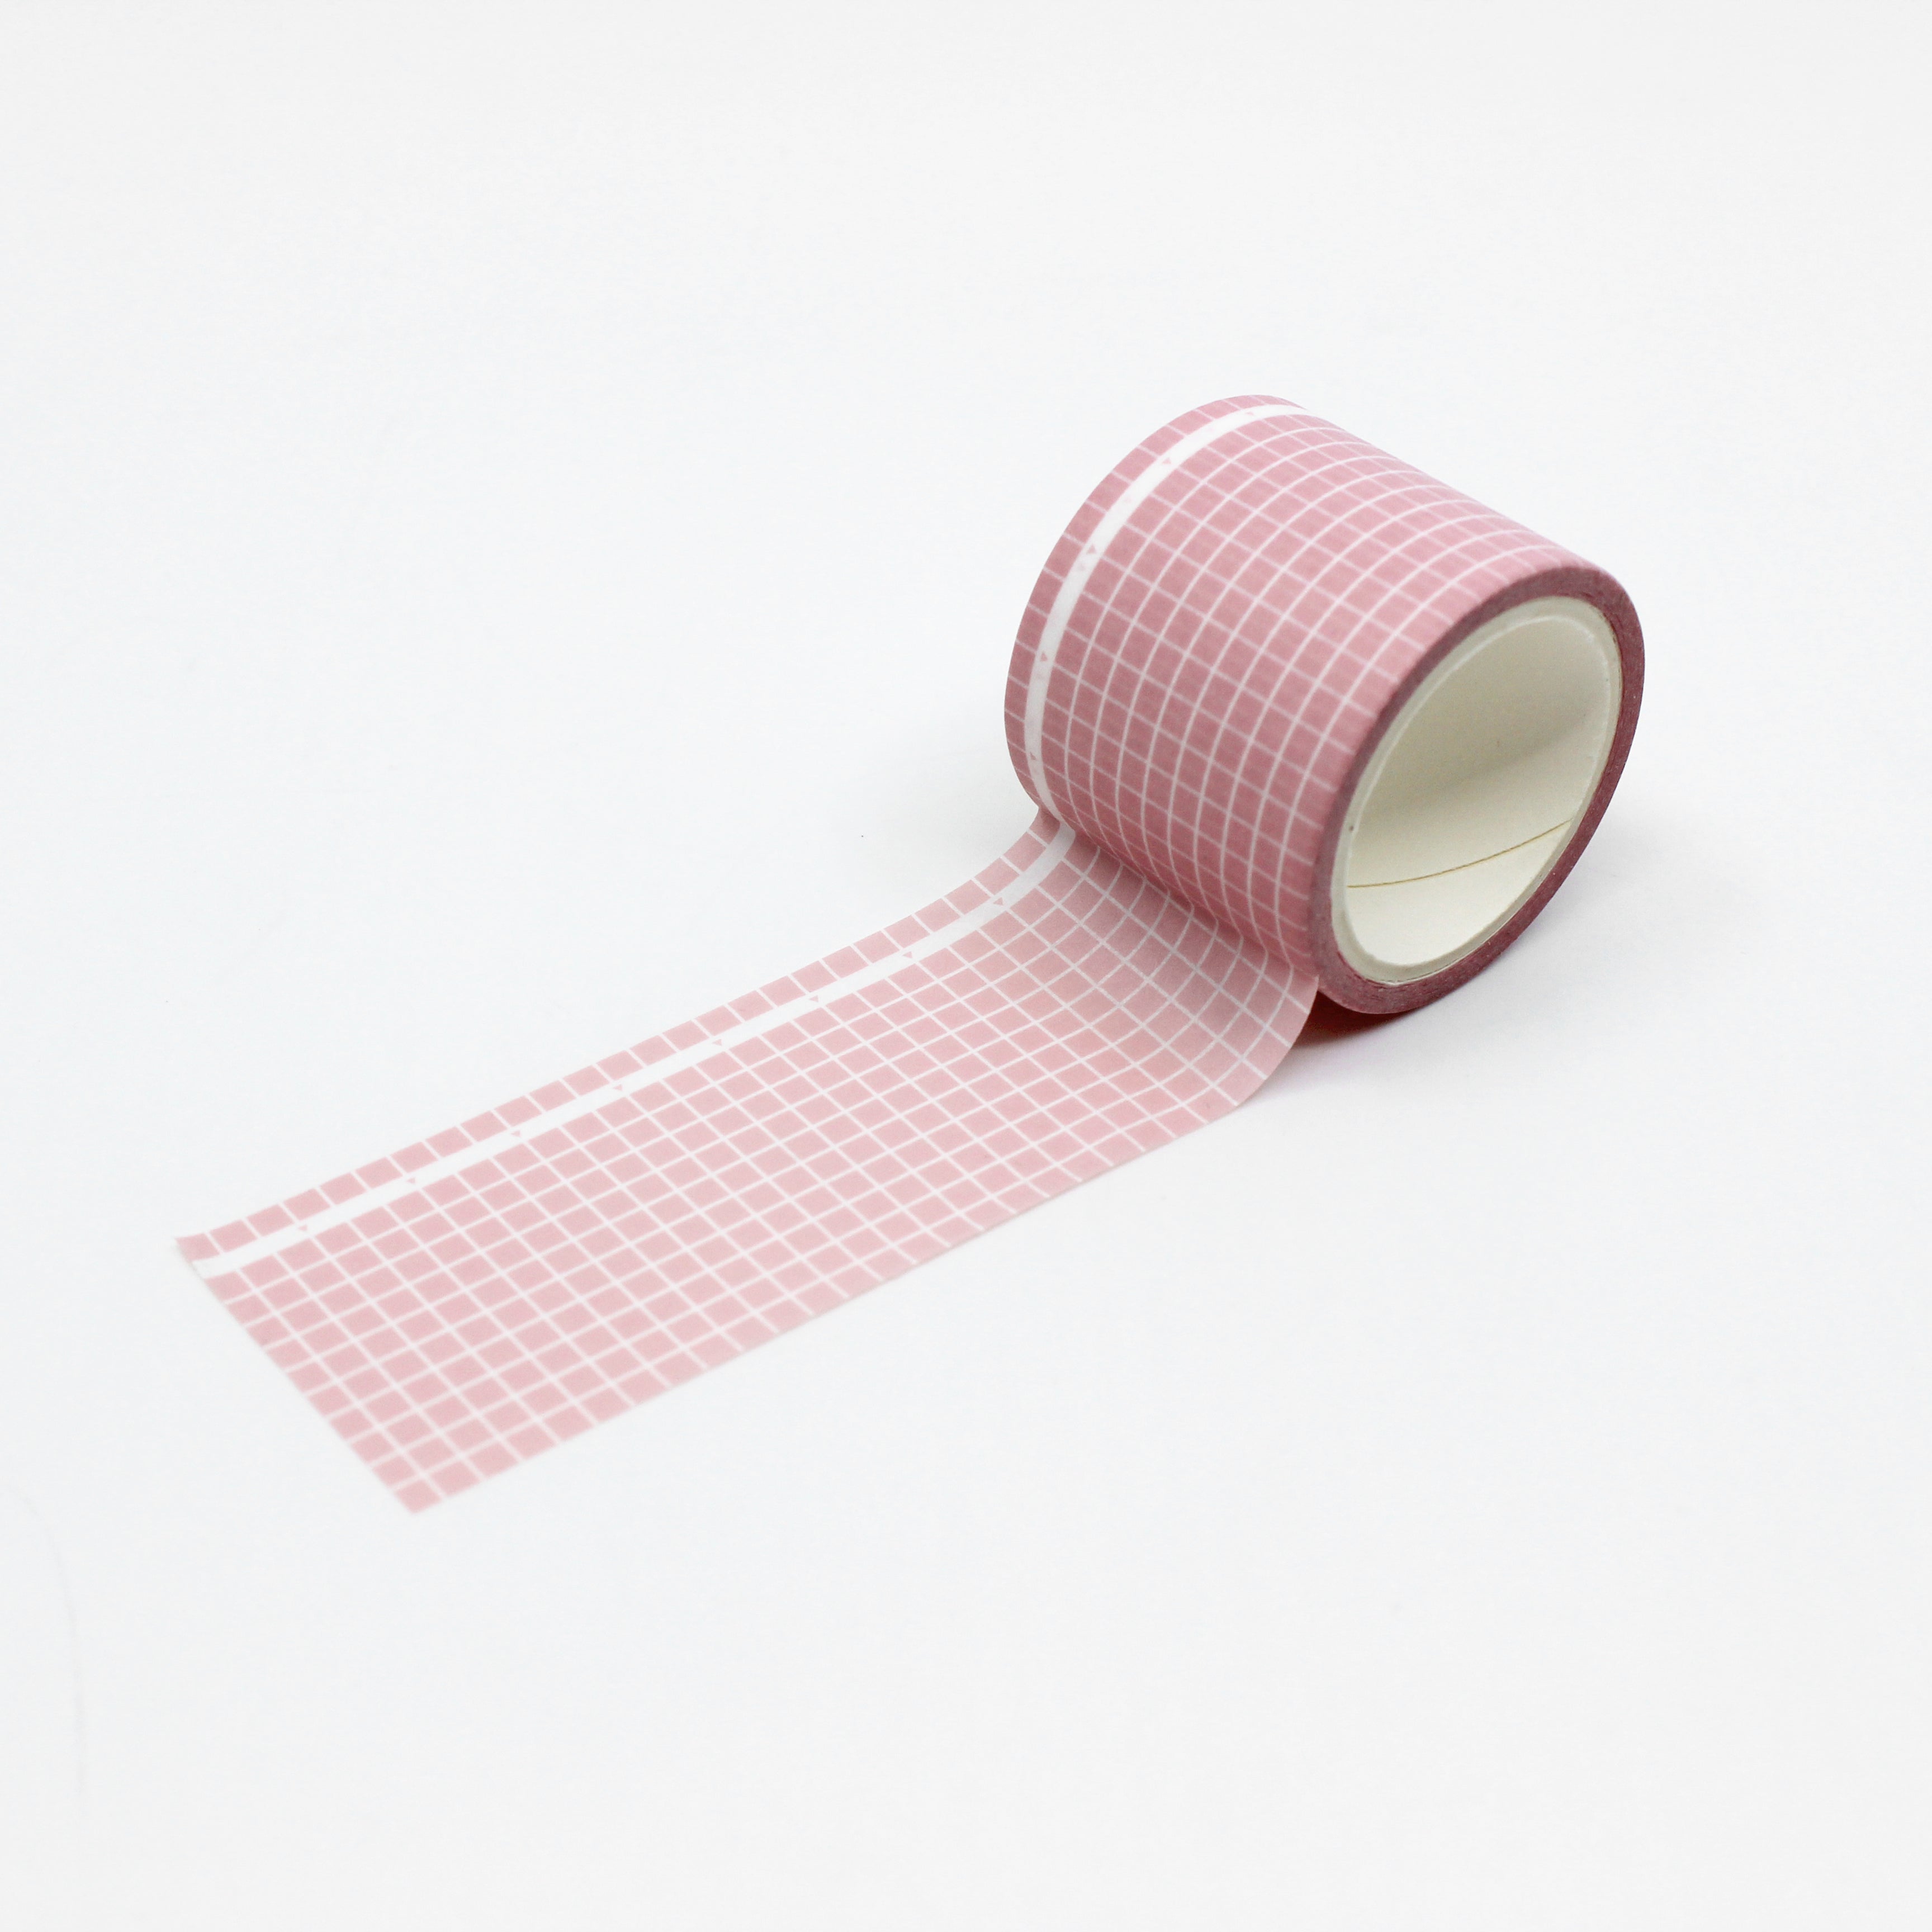 This is a full pattern repeat view of pink wide grid washi tape BBB Supplies Craft Shop